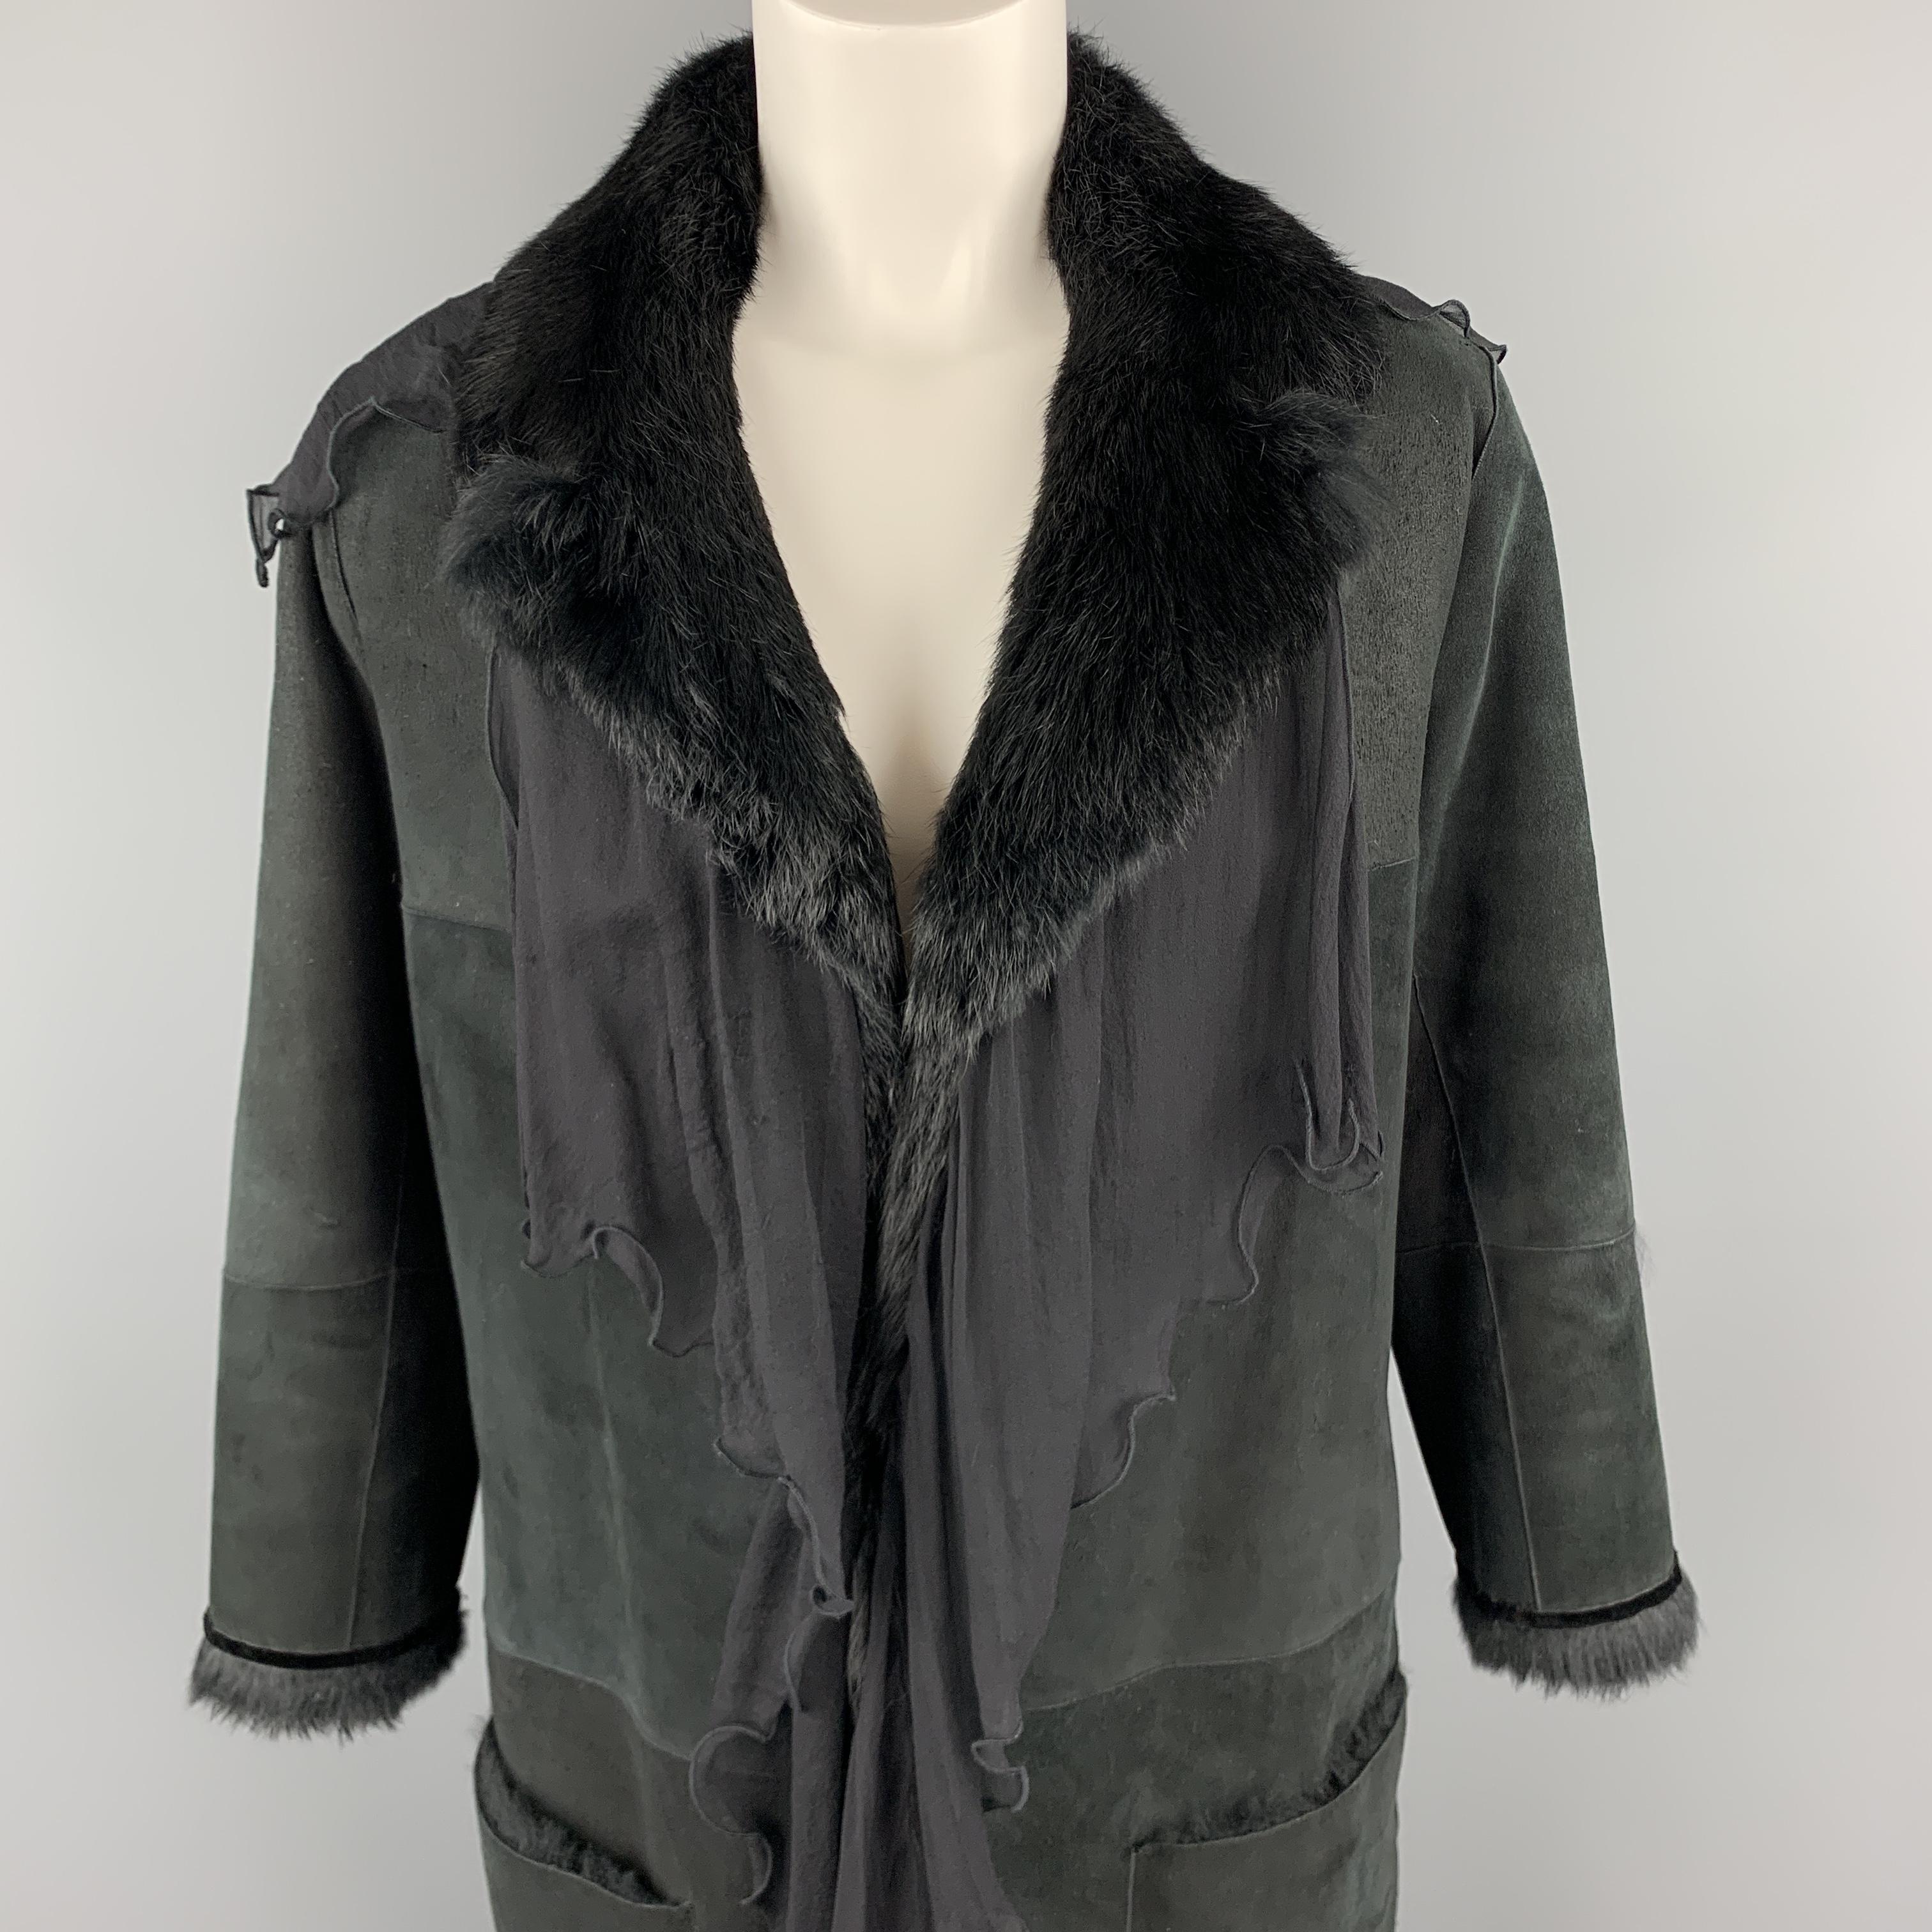 Vintage EMANUEL UNGARO coat comes in black sueded shearling with full rabbit fur interior, open front with notch lapel, patch pockets, and chiffon ruffled trim. Wear throughout. As-is. Made in Italy.

Good Pre-Owned Condition.
Marked: EU